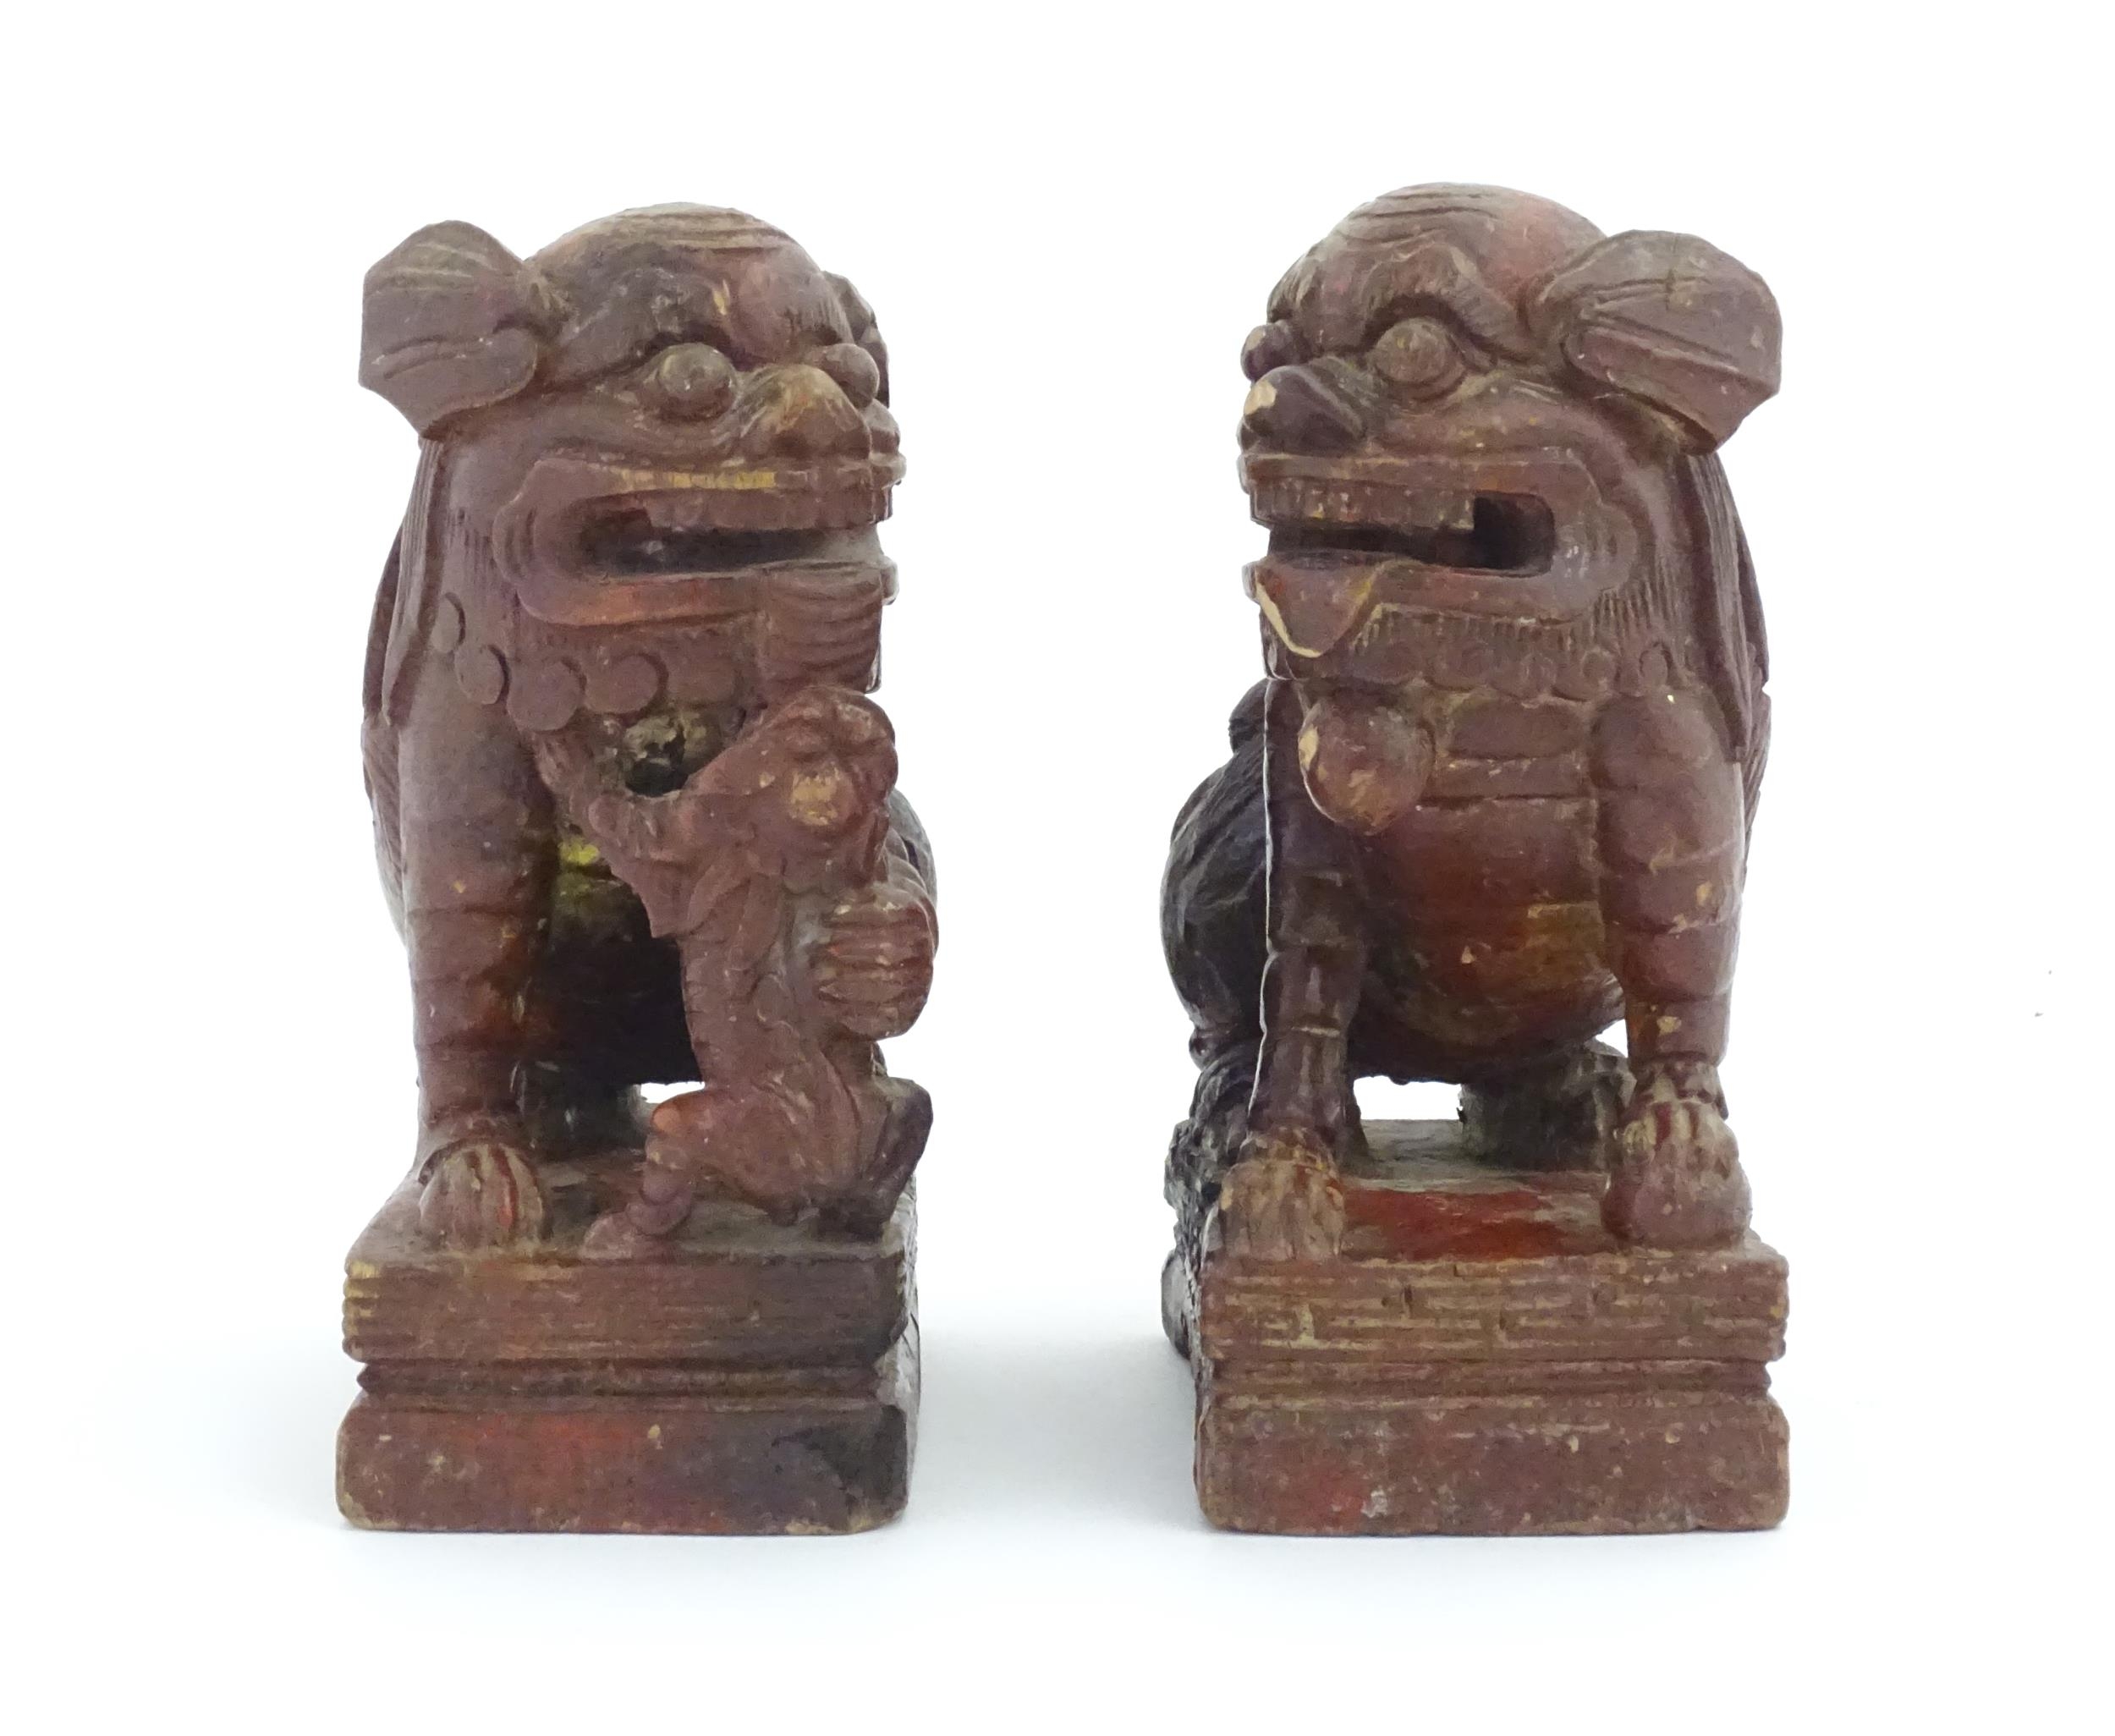 Two Chinese carved wooden foo dogs / guardian lions, one with a cub, the other with a ball, with - Image 4 of 9